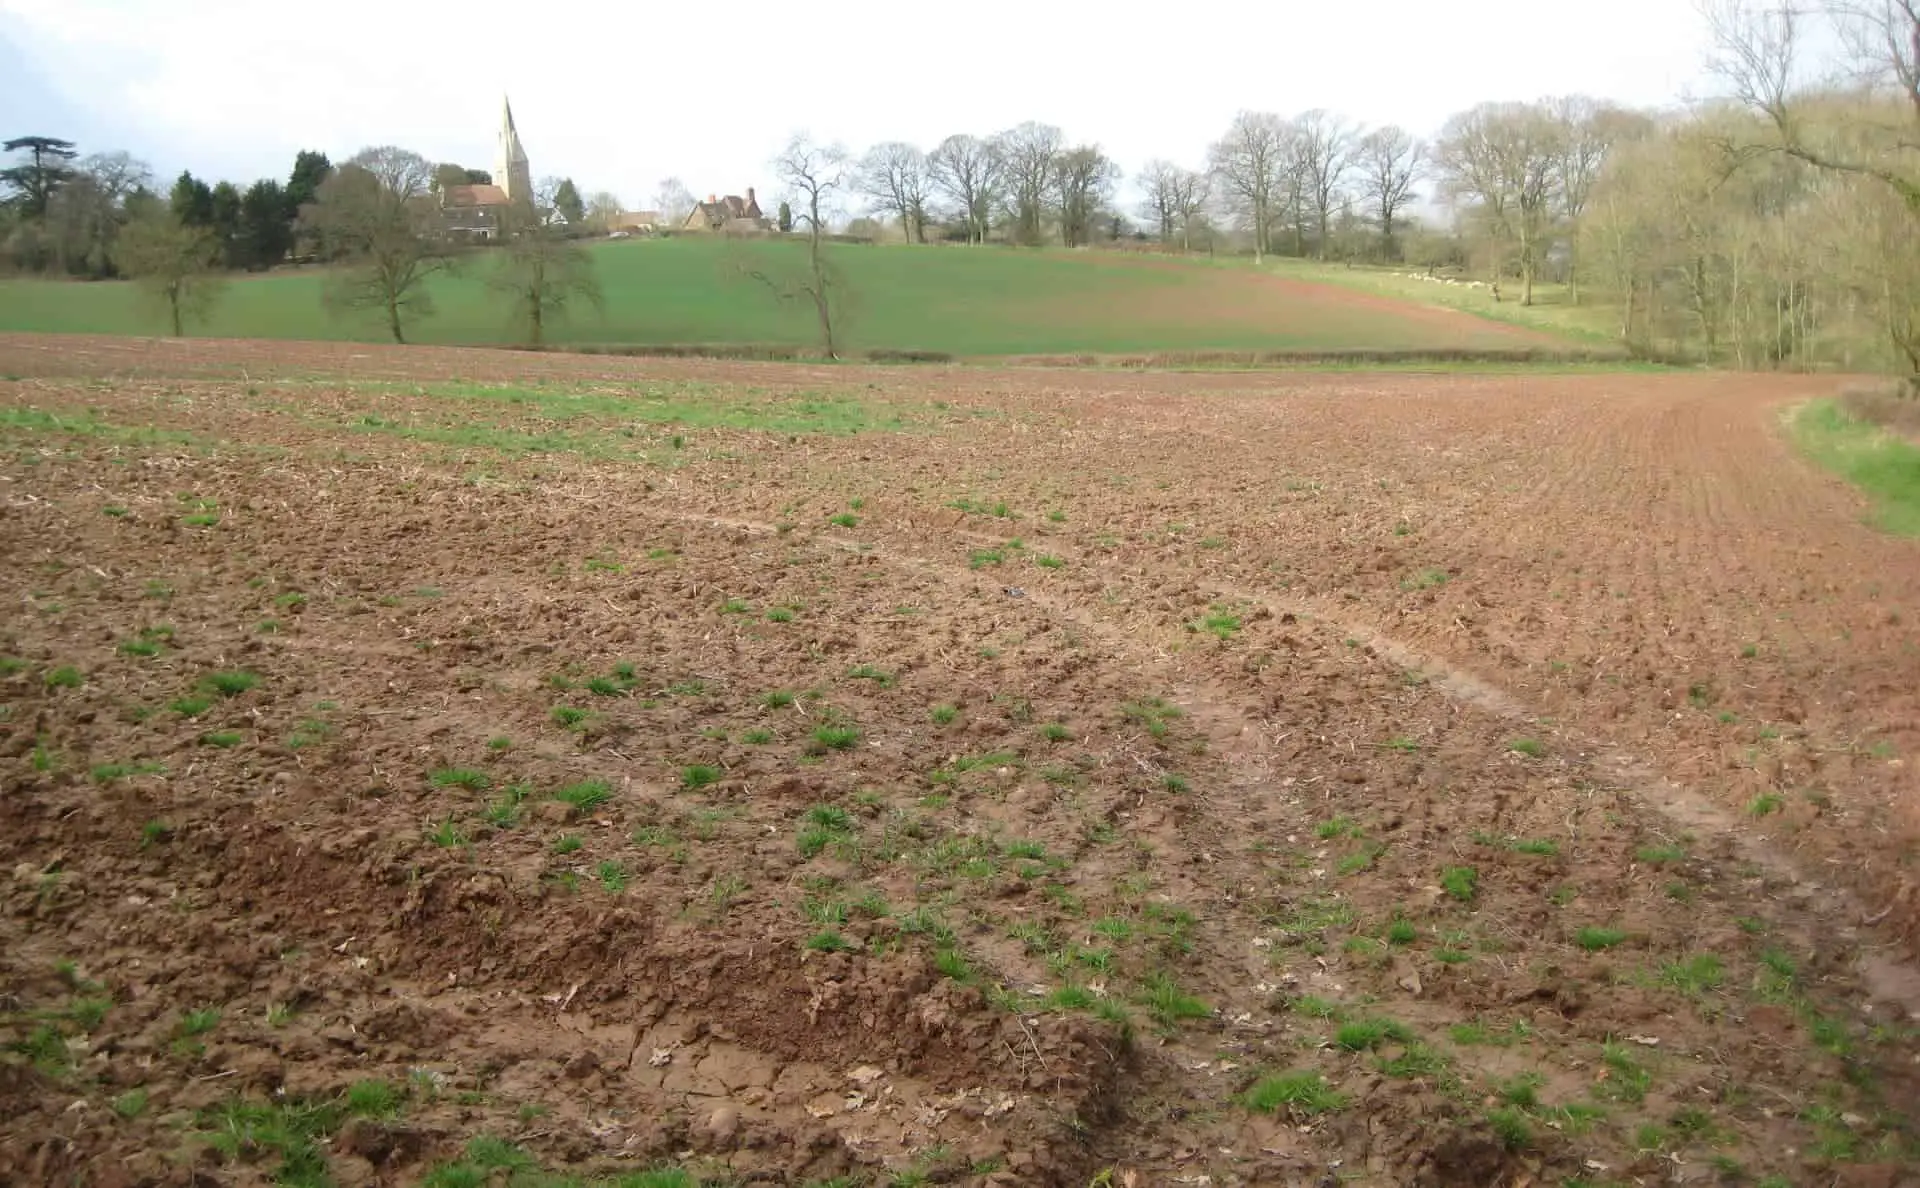 Field prior to wet system